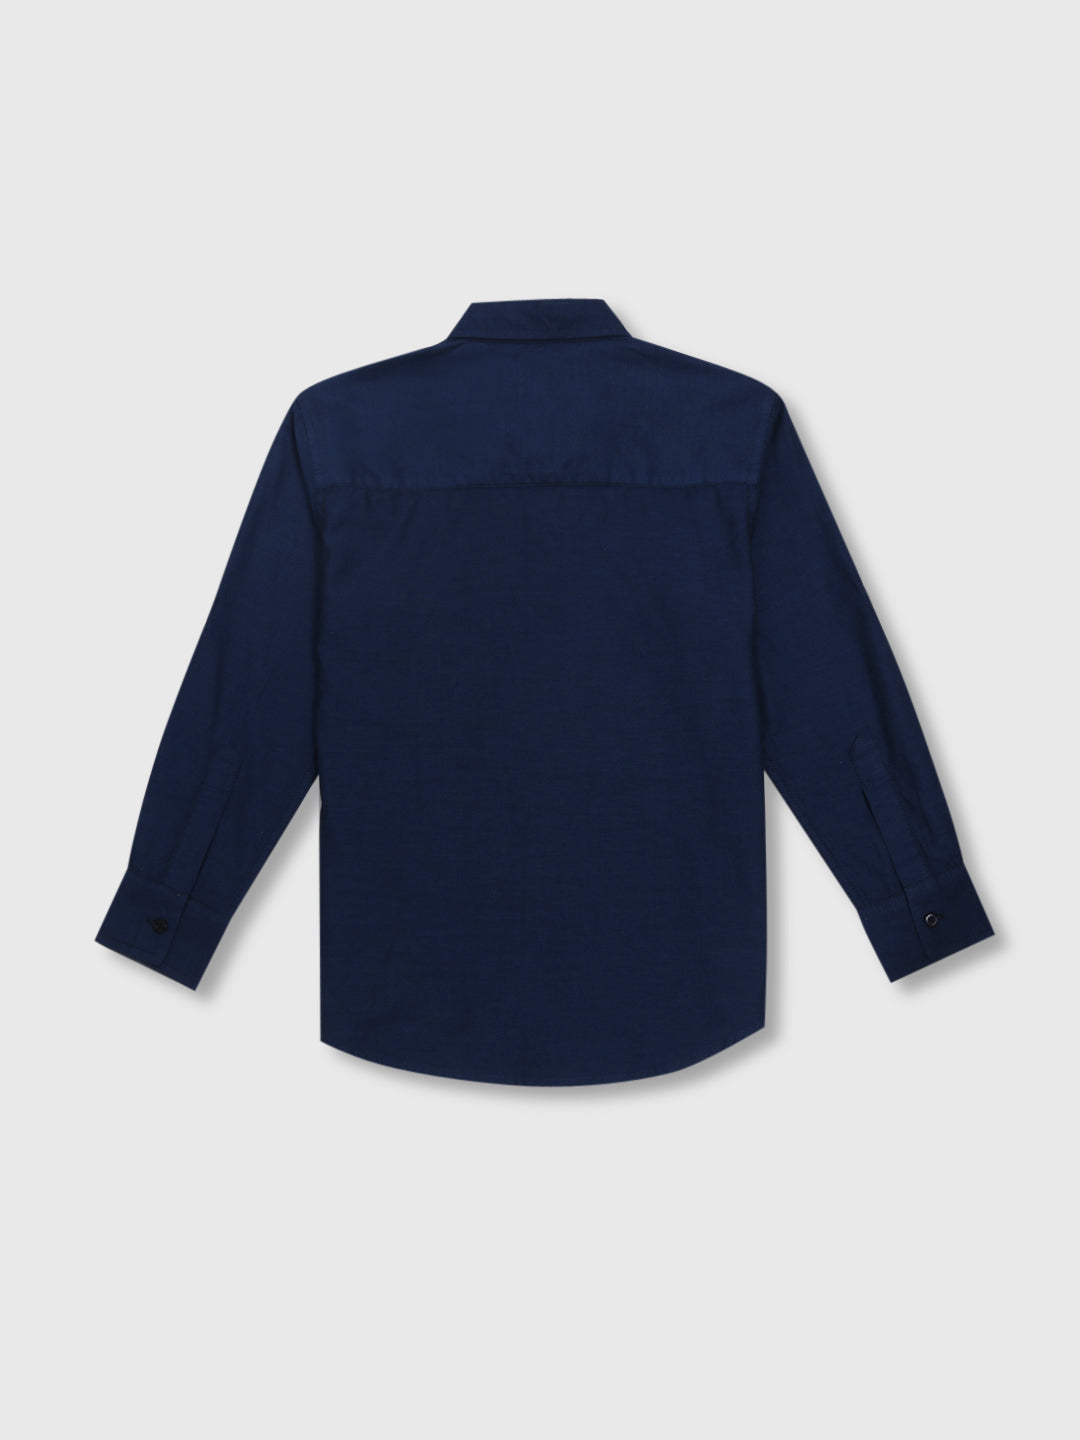 Boys Blue Cotton Solid Full Sleeves Shirt